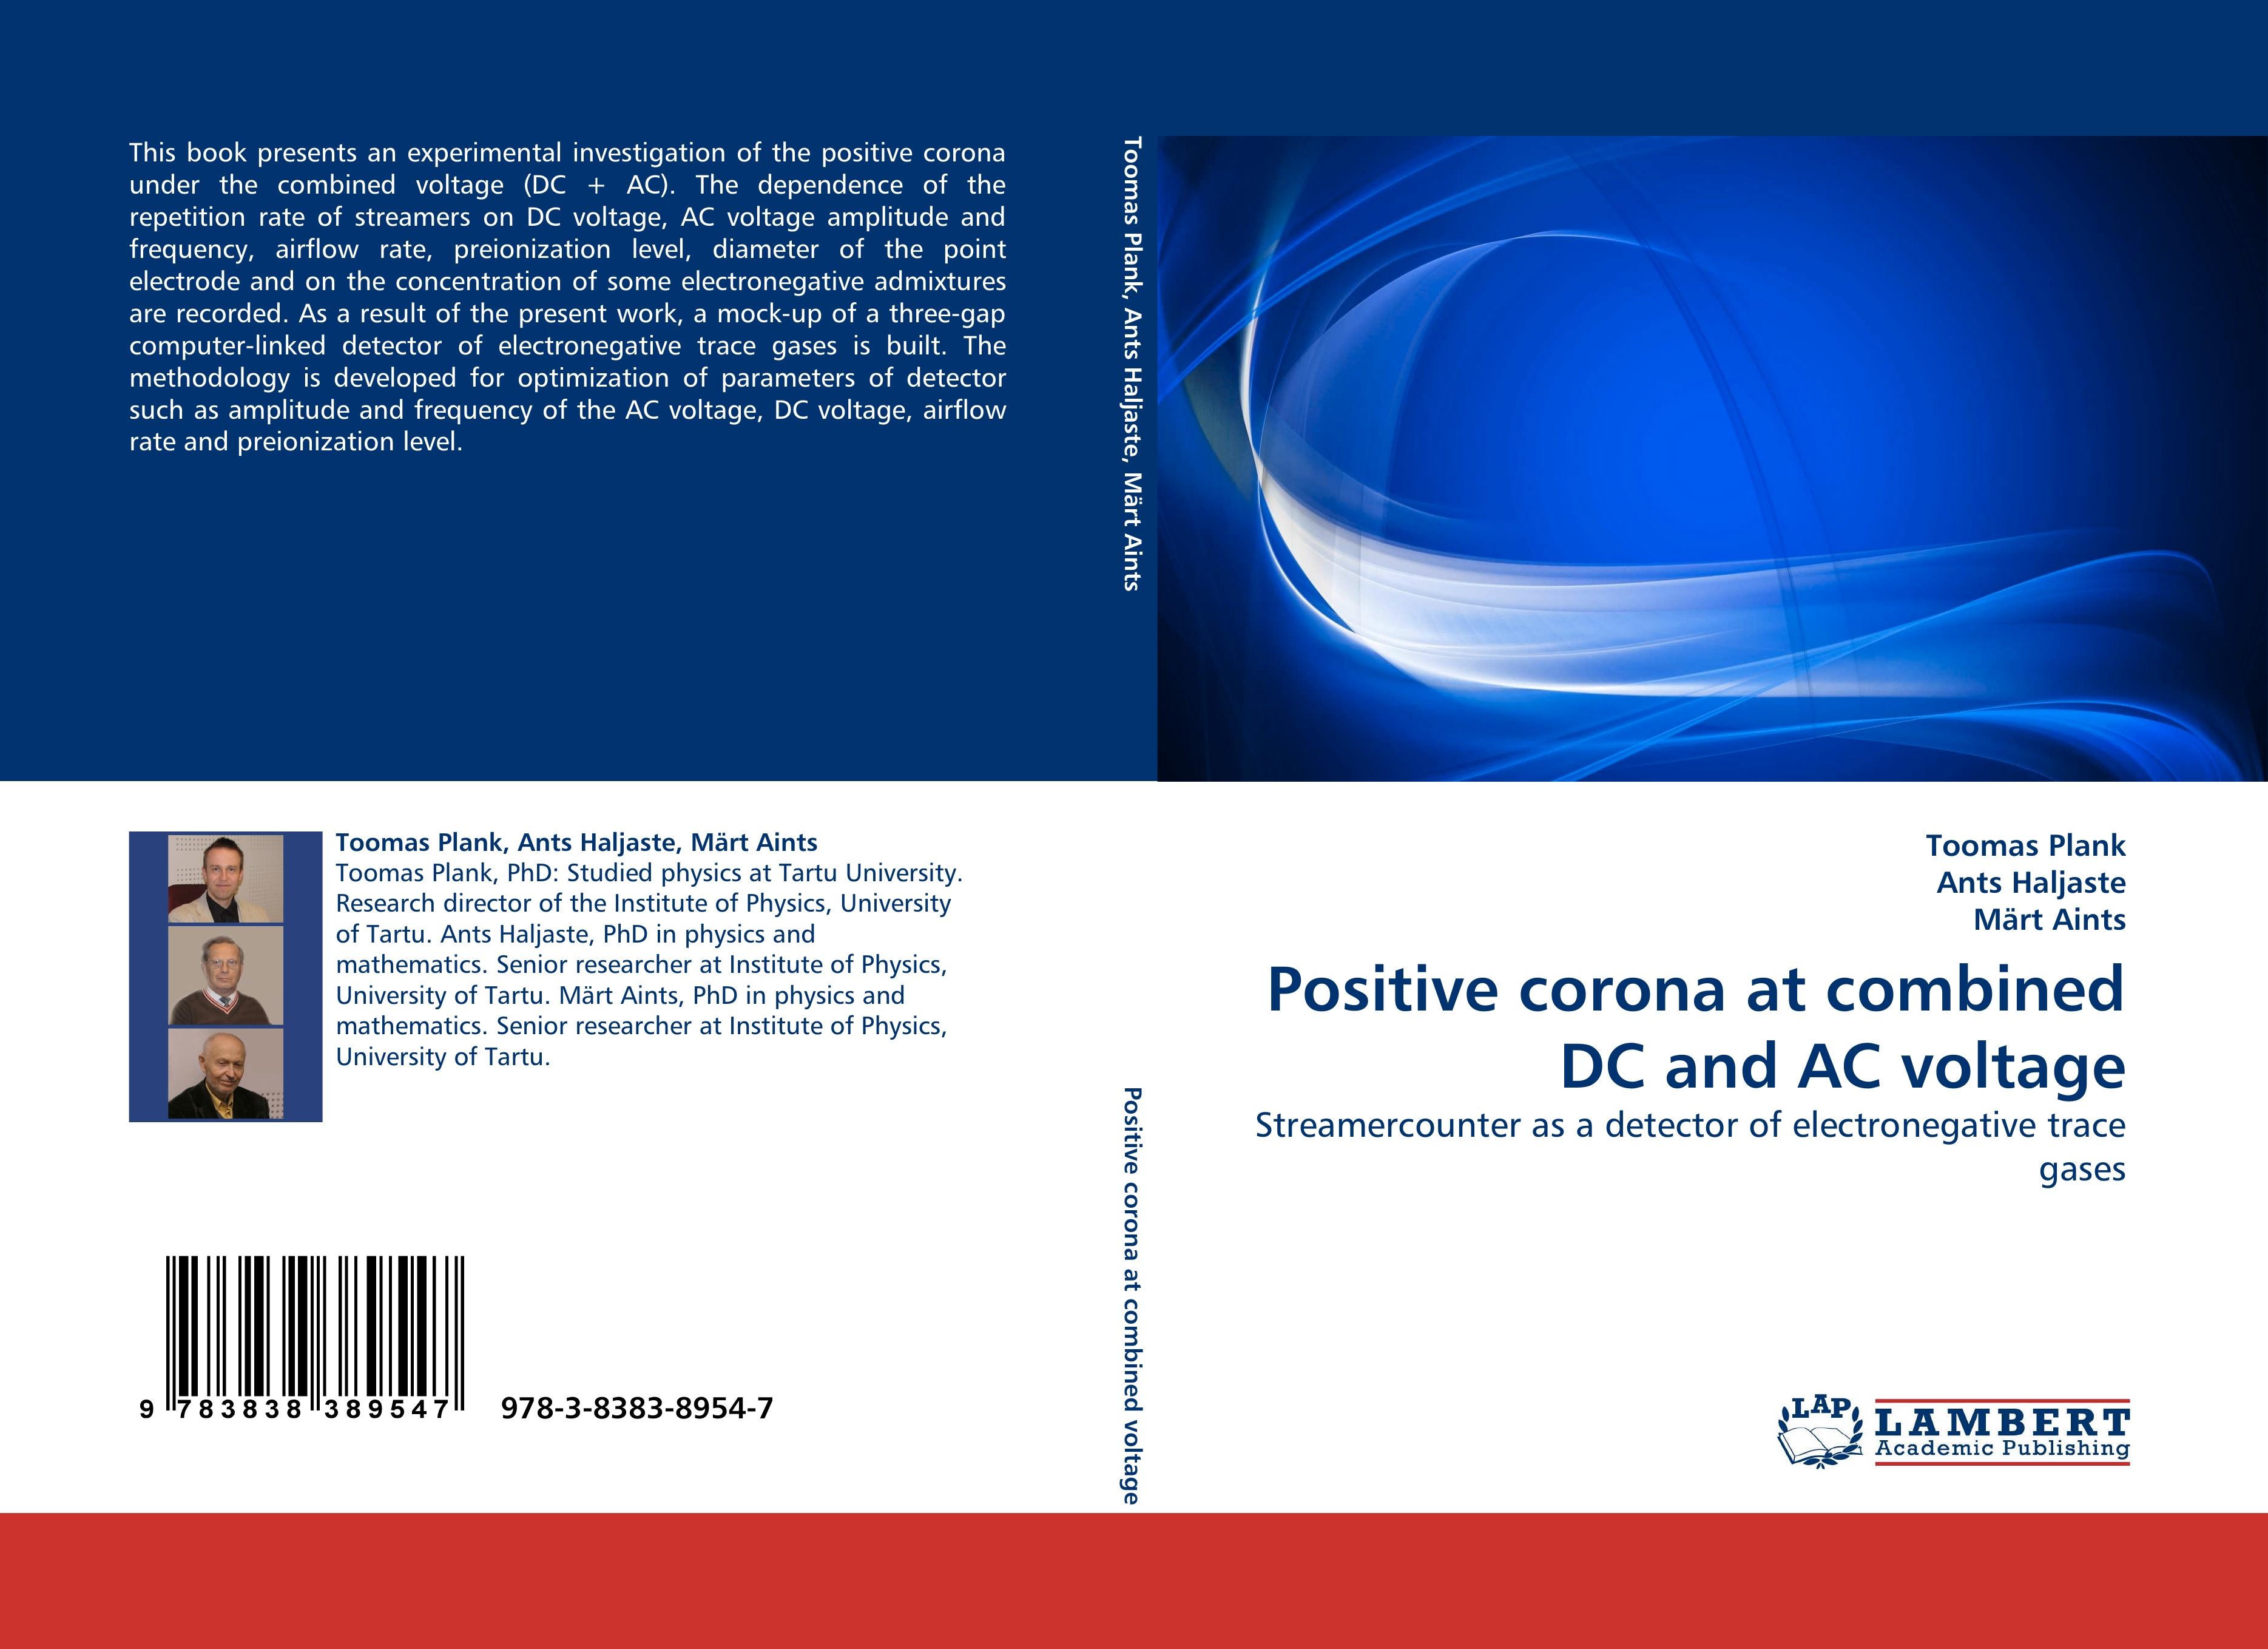 Positive corona at combined DC and AC voltage - Toomas Plank Ants Haljaste Maert Aints